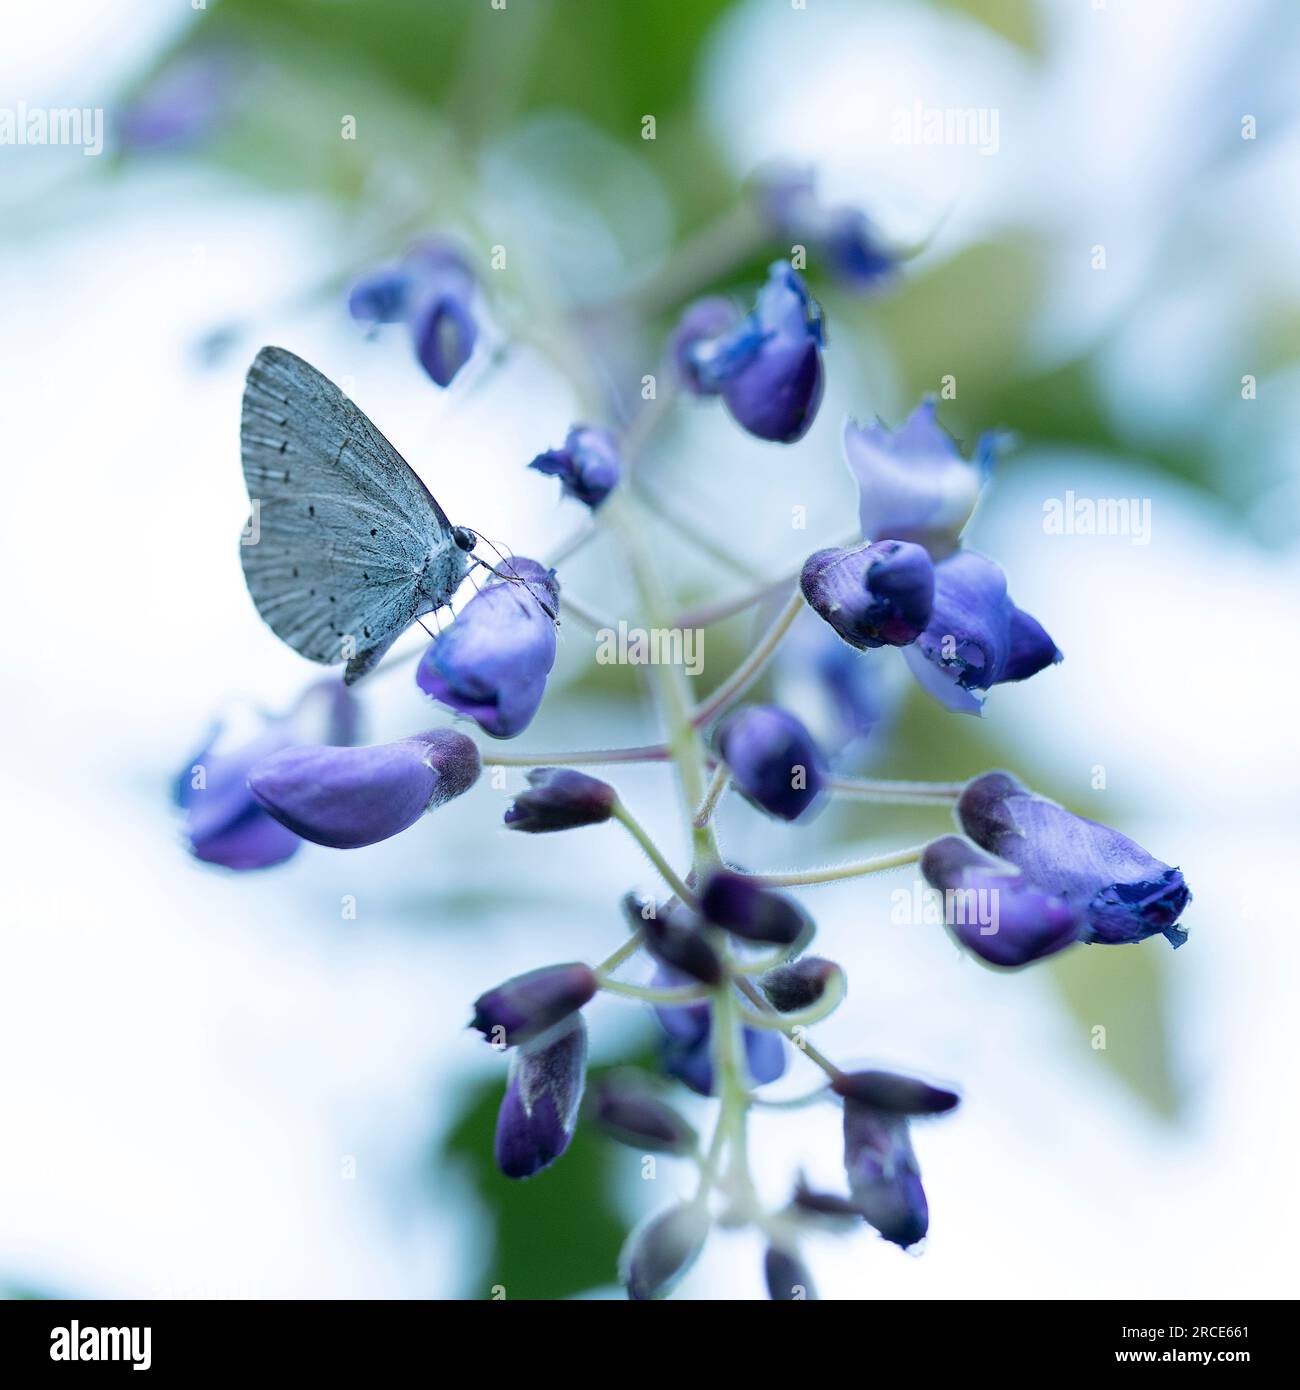 A Holly blue butterfly Celastrina argiolus butterfly pollinating and perching on wisteria flowers Stock Photo